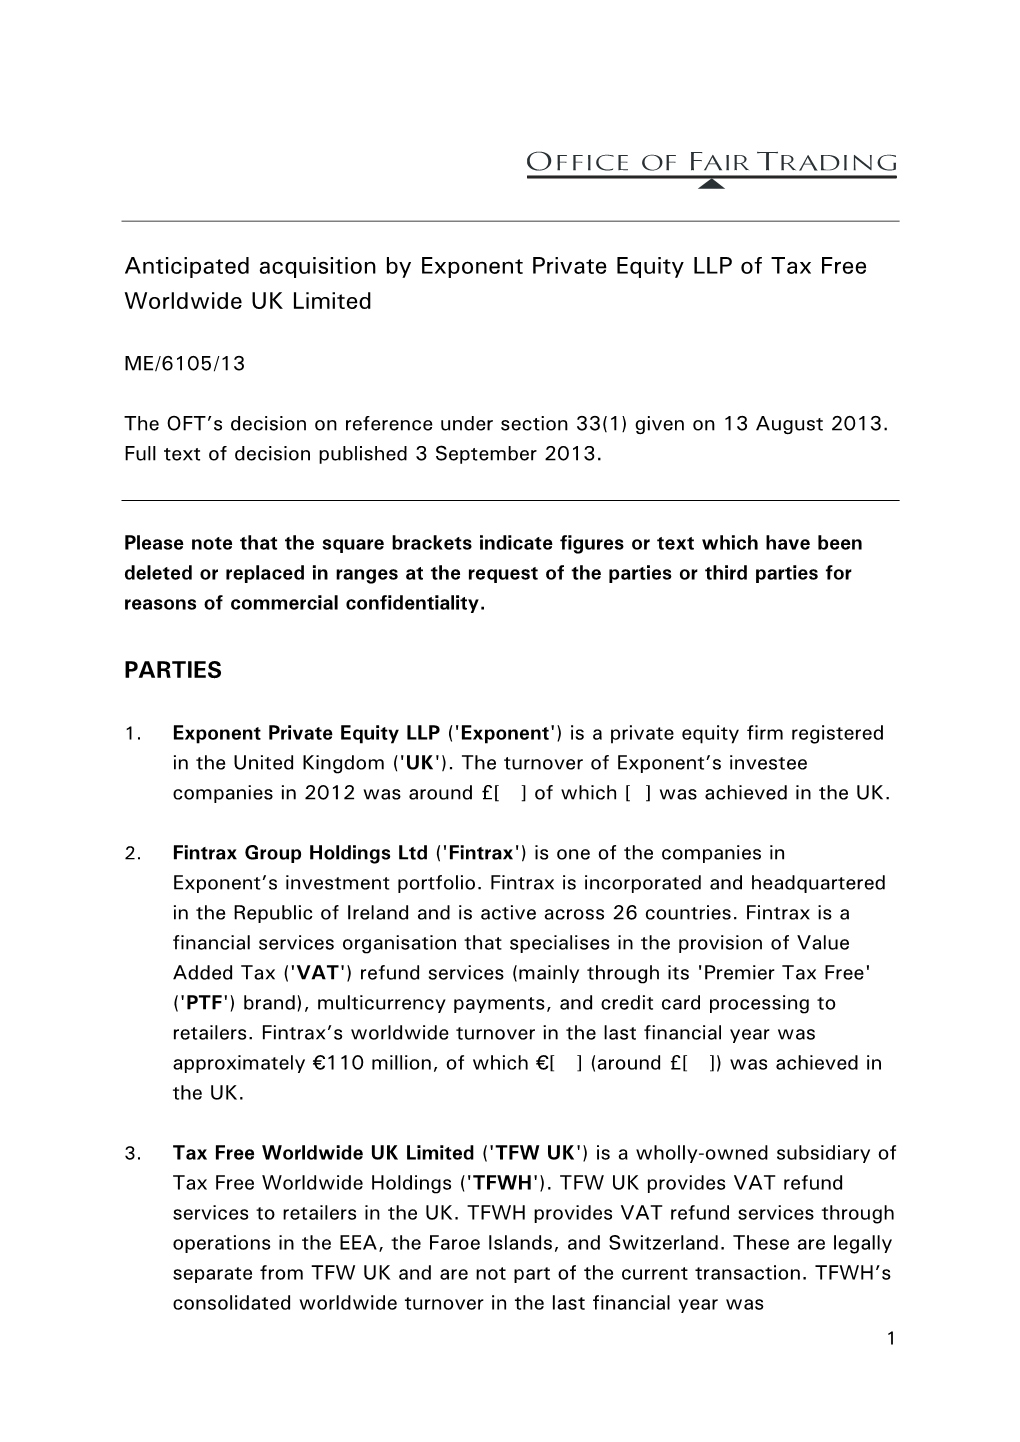 Full Text of the Decision Regarding the Anticipated Acquisition by Exponent Private Equity LLP of Tax Free Worldwide UK Limited